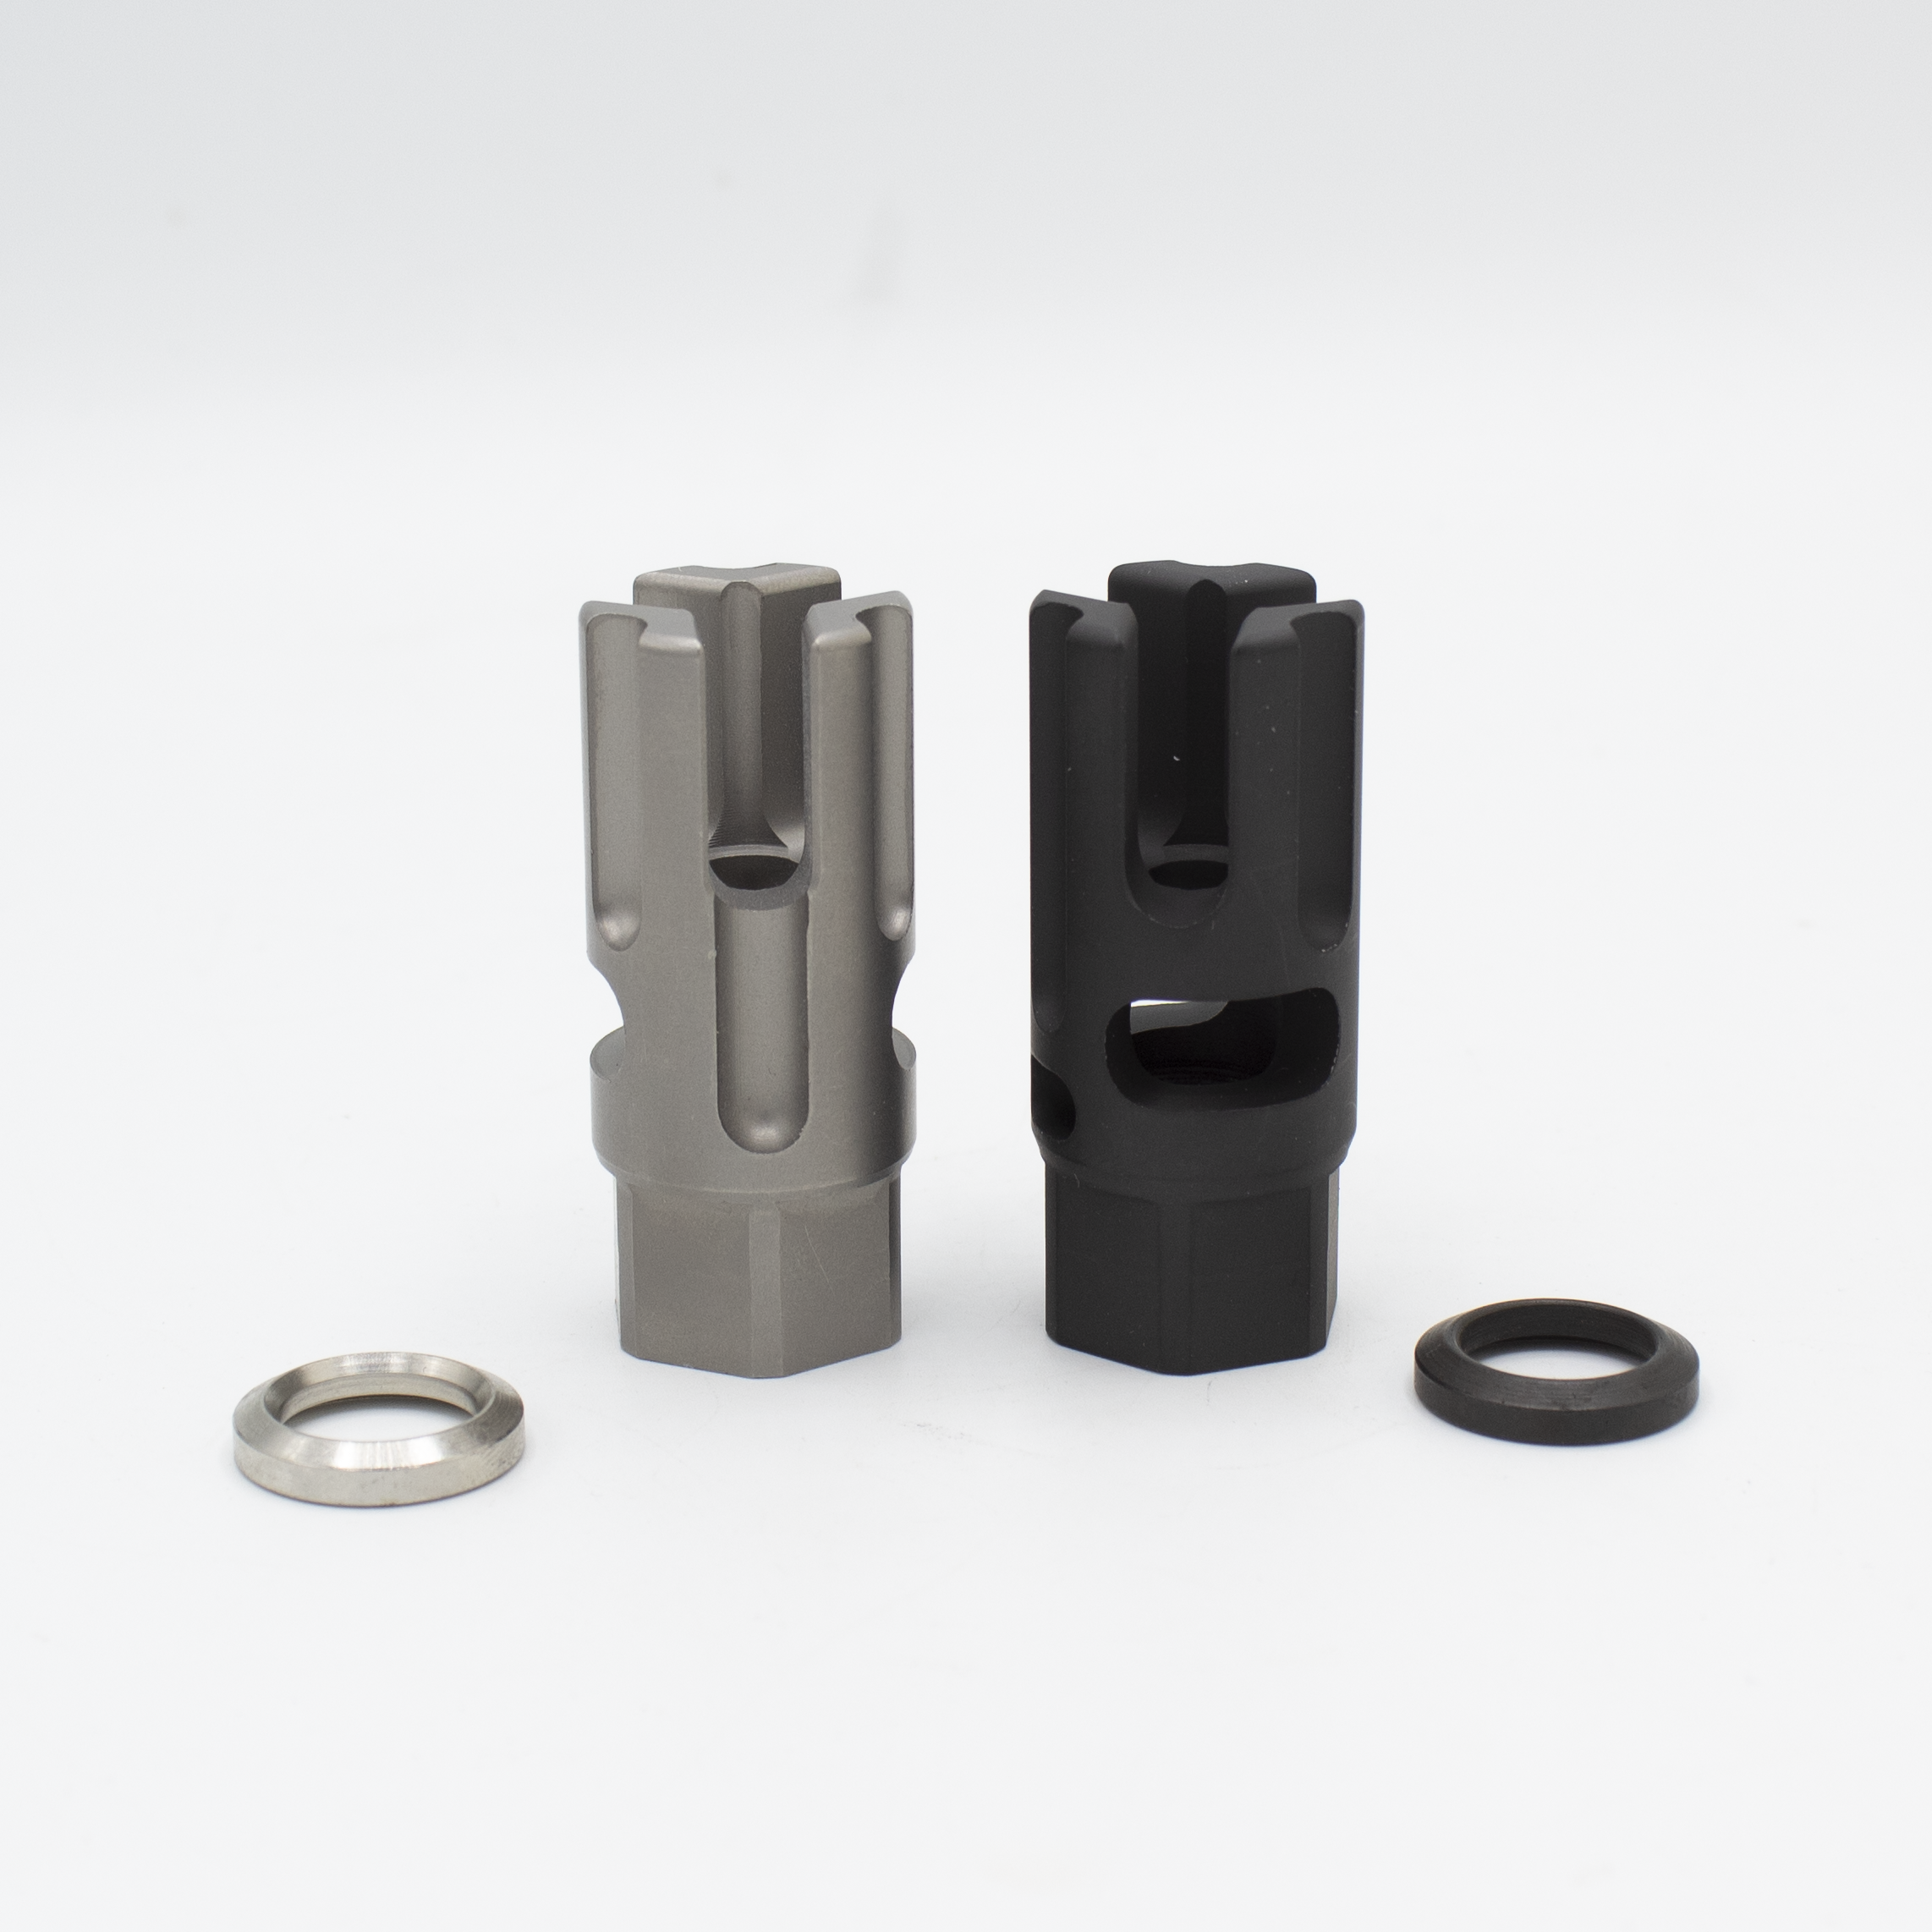 Does this muzzle brake works on AR-15 and 5.56mm ammo?